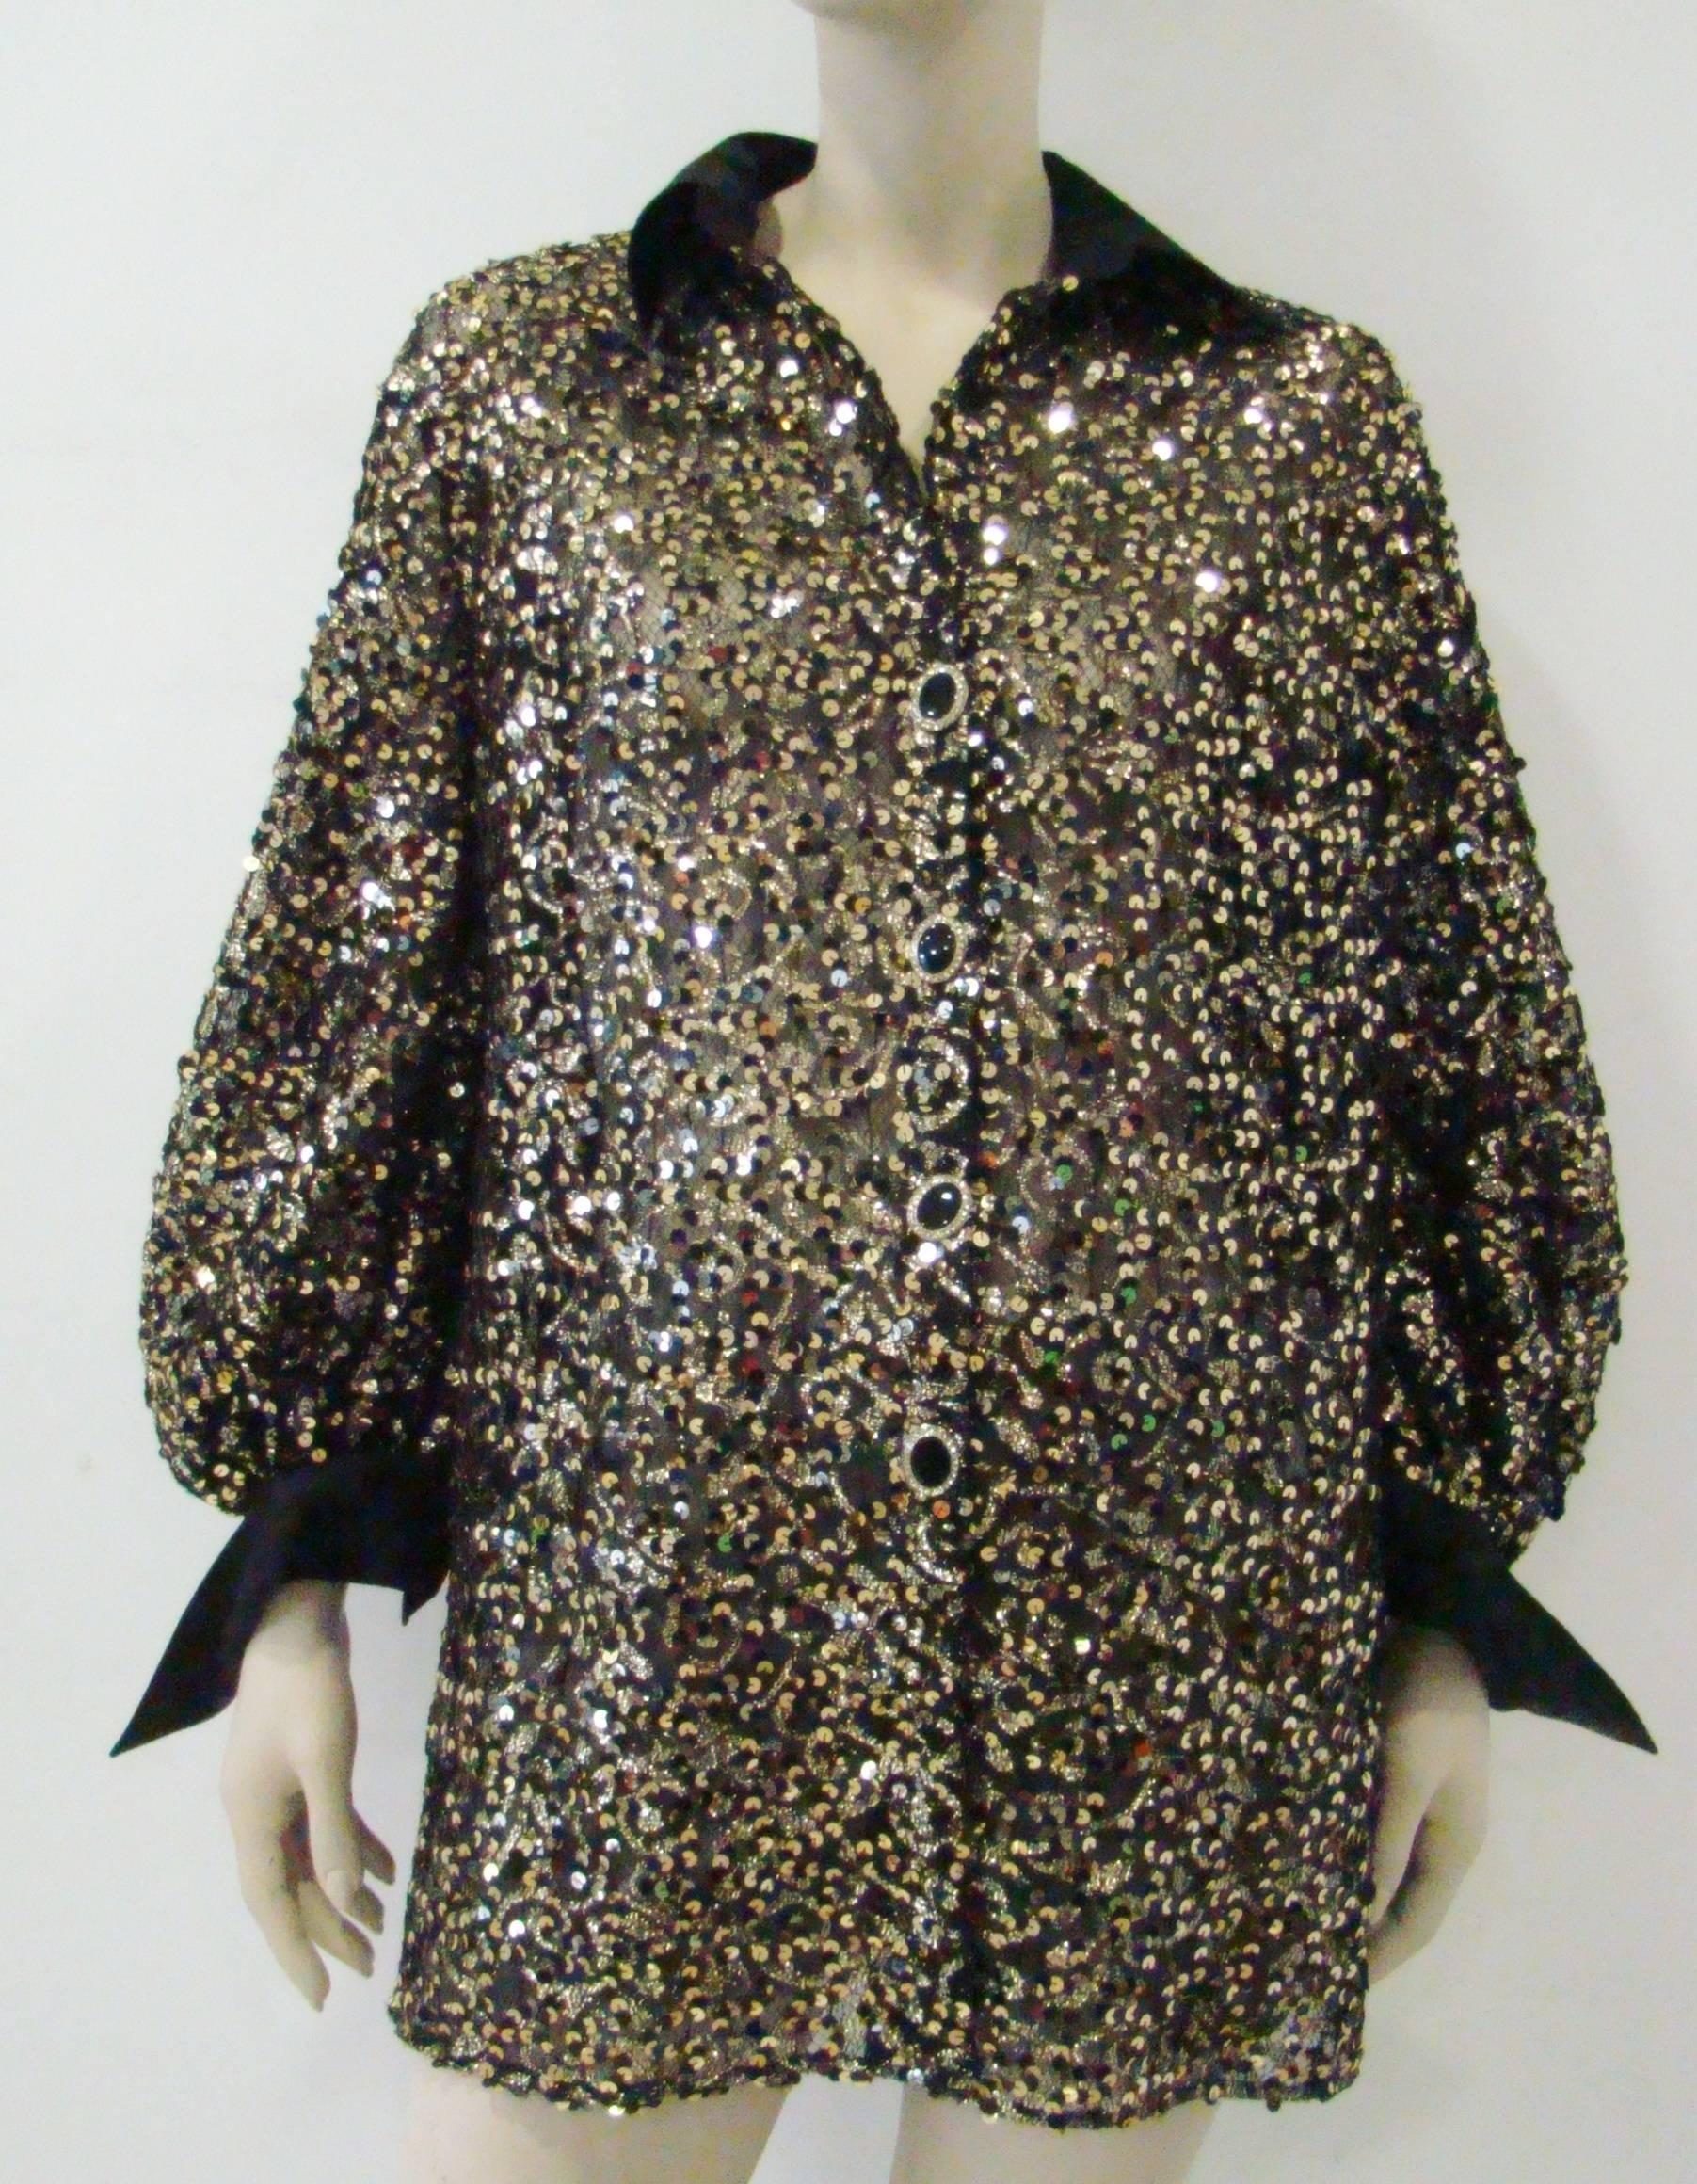 Flaunt In This Metallic Gianfranco Ferre Evening Jacket. Made From Gold Metallic Sequins Featuring A Black Collar Combined With Long Cuffed Sleeves. Front Button Fastening And Fully Lined Inside With Black Net. Wear It And Feel Wonderful